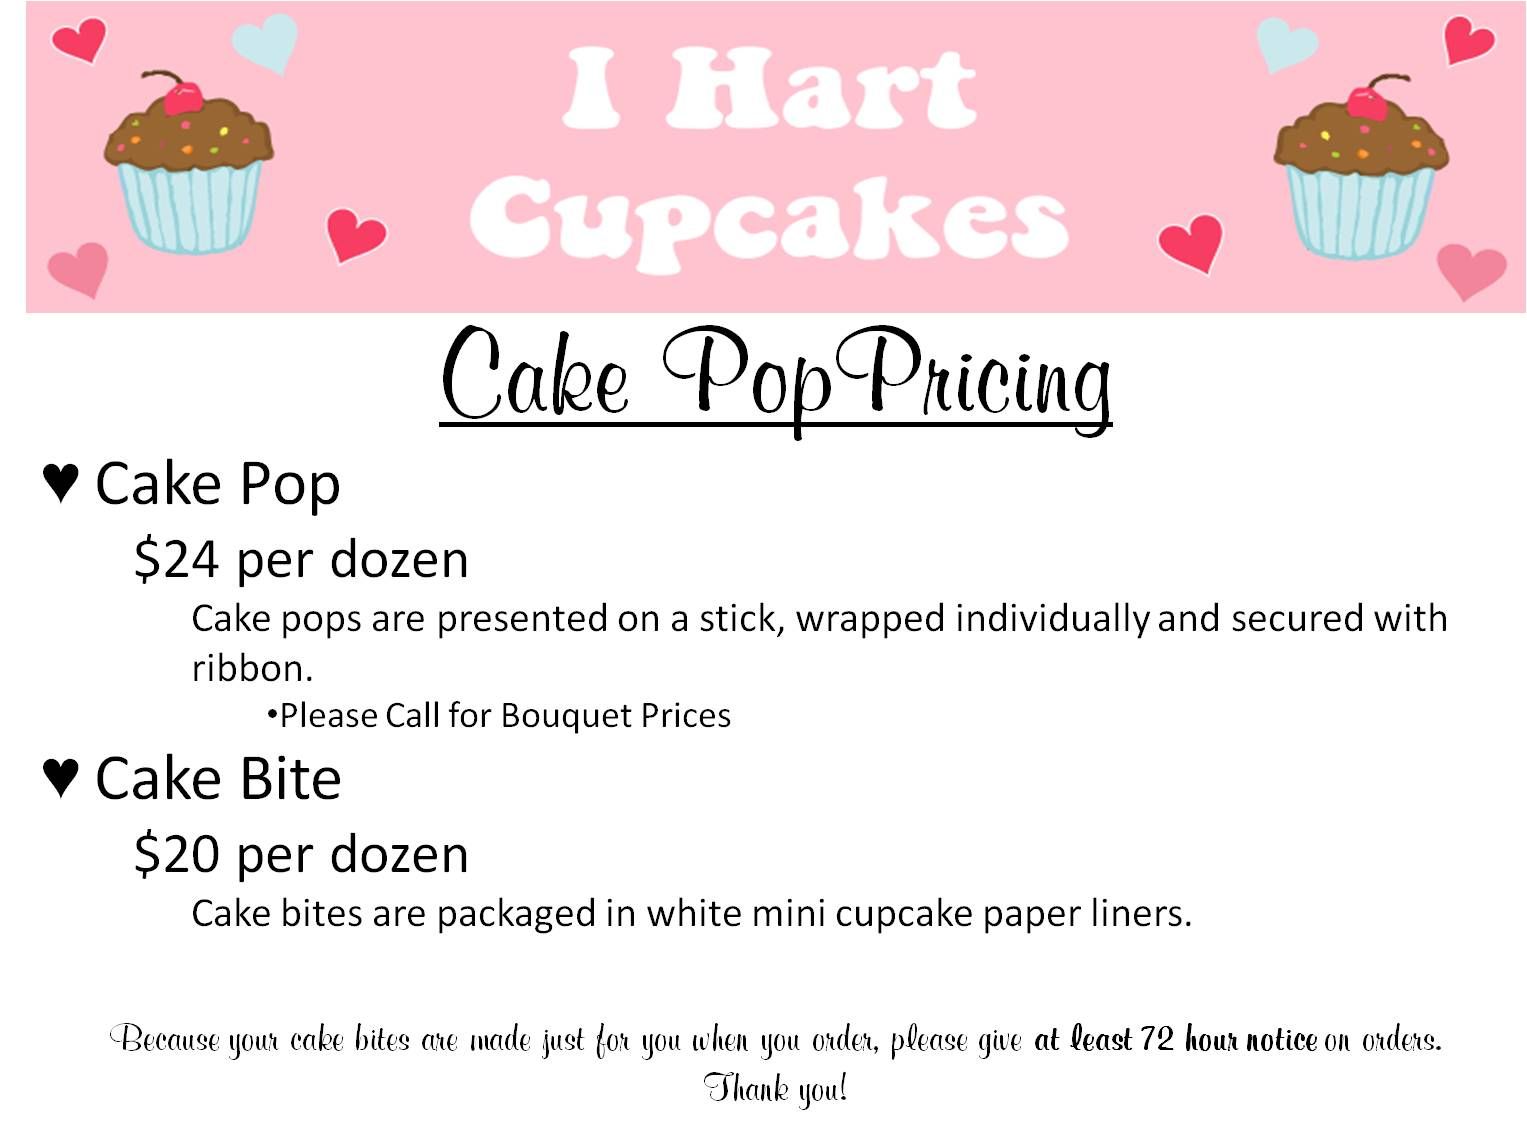 How Much Are Cake Pops: Exploring the Cost of Cake Pops